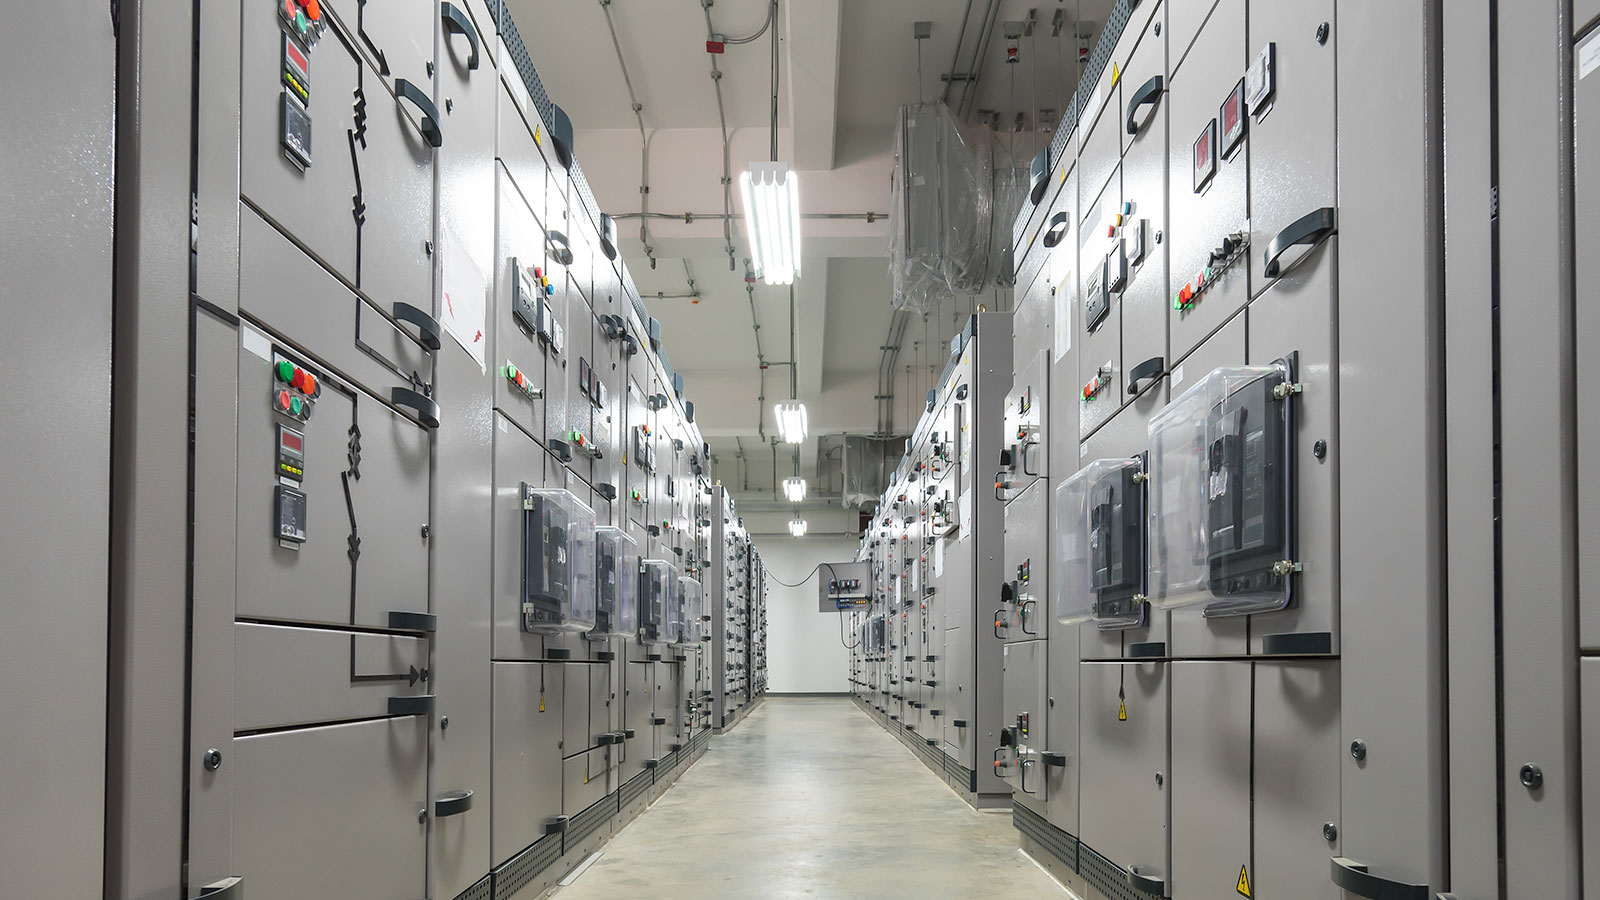 The high-voltage switchgear market is set to grow by an average of over 3% each year.